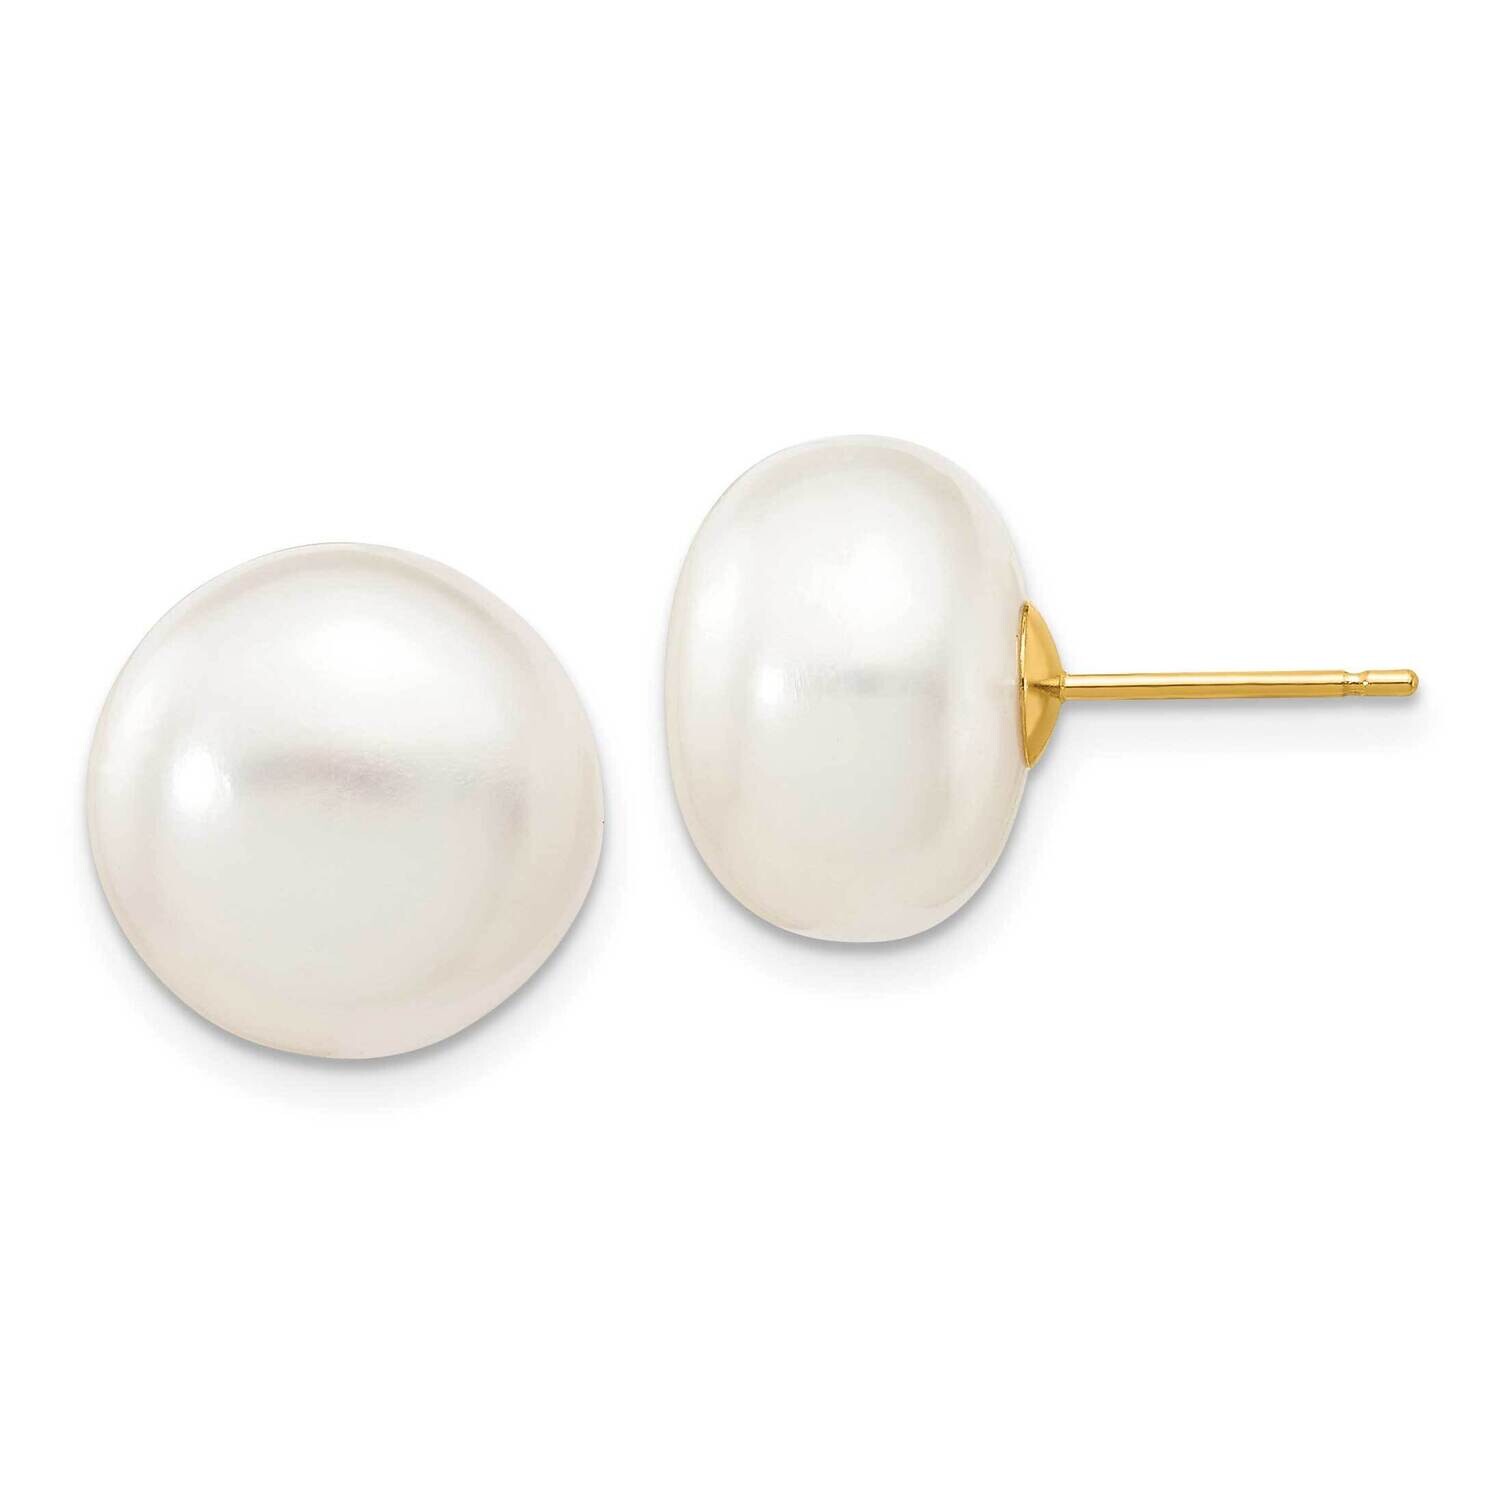 12-13mm White Button Freshwater Cultured Pearl Stud Post Earrings 10k Gold 10X120BW